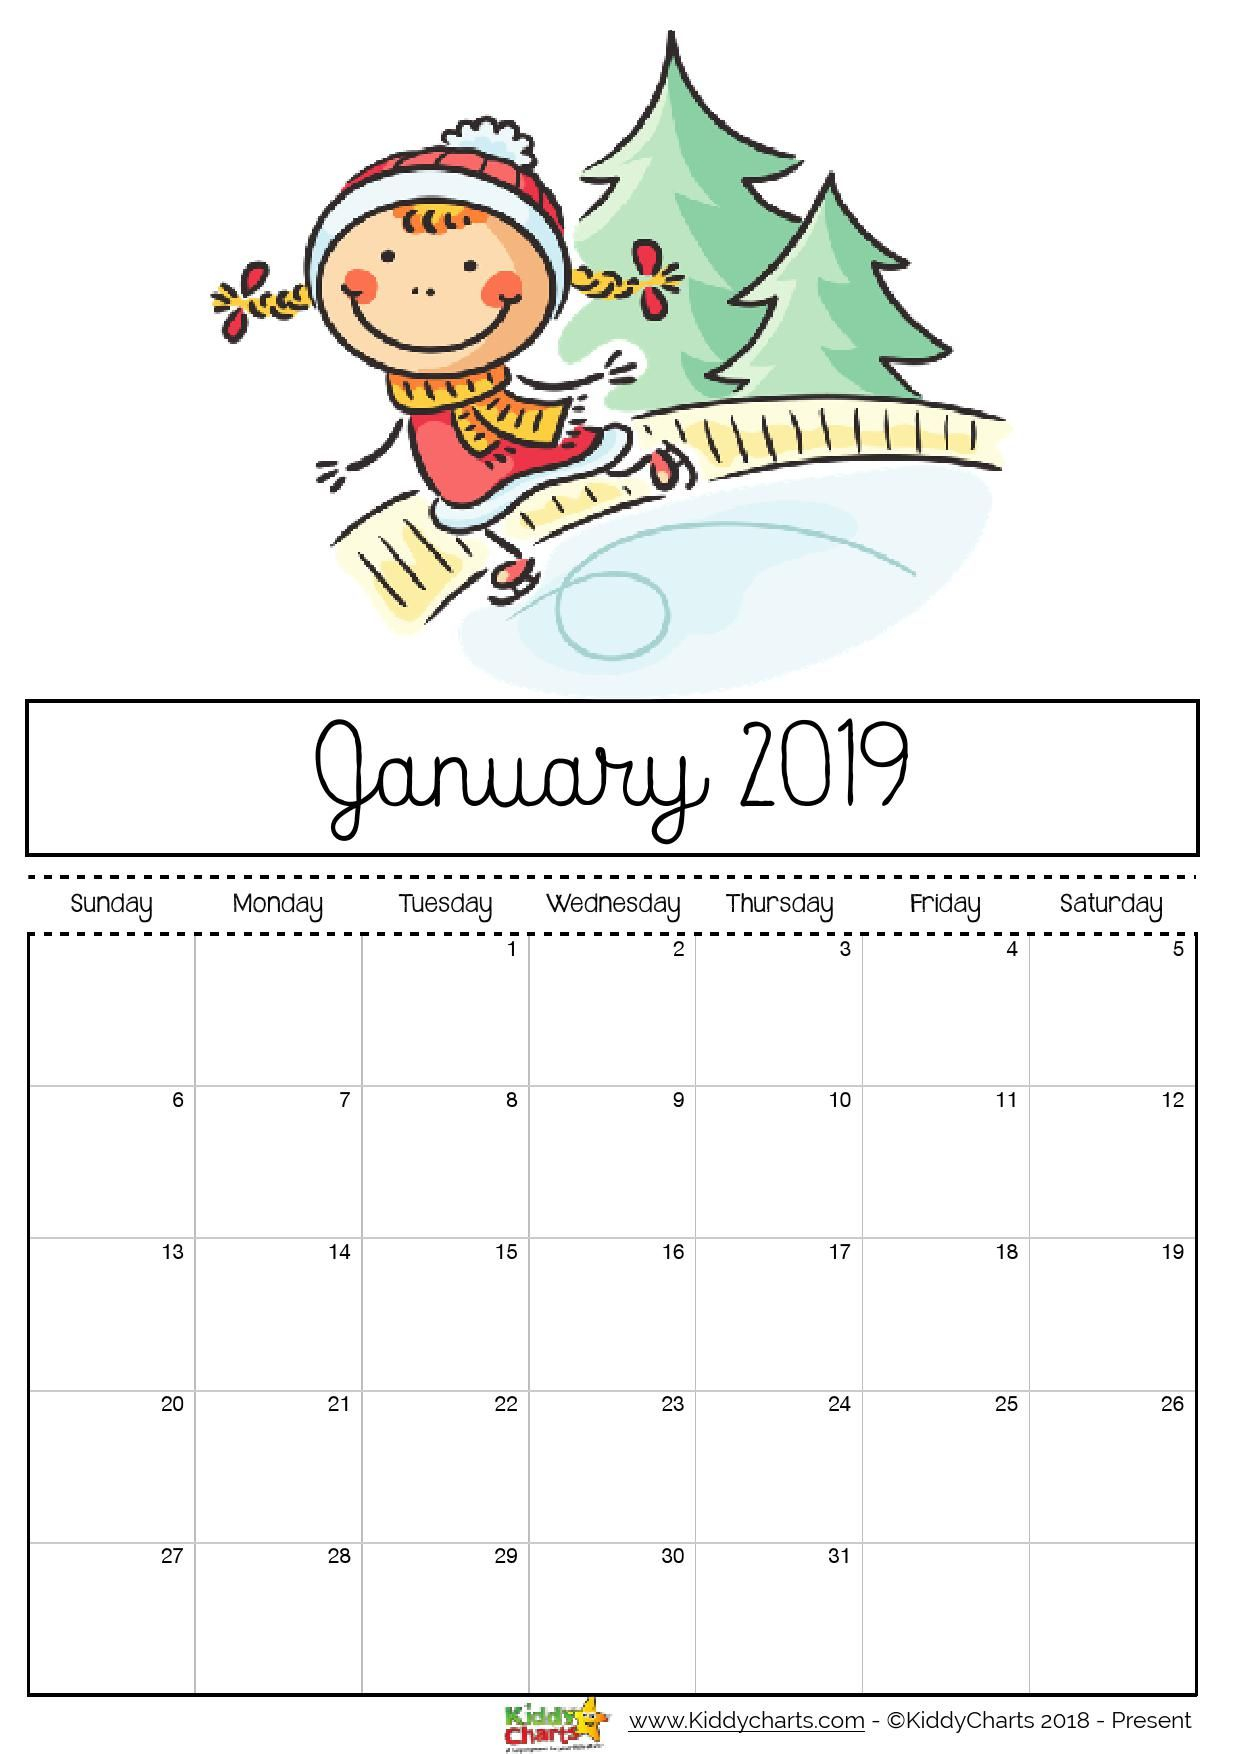 Check Out Our Fantastic Free 2019 Calendar For Your Child's